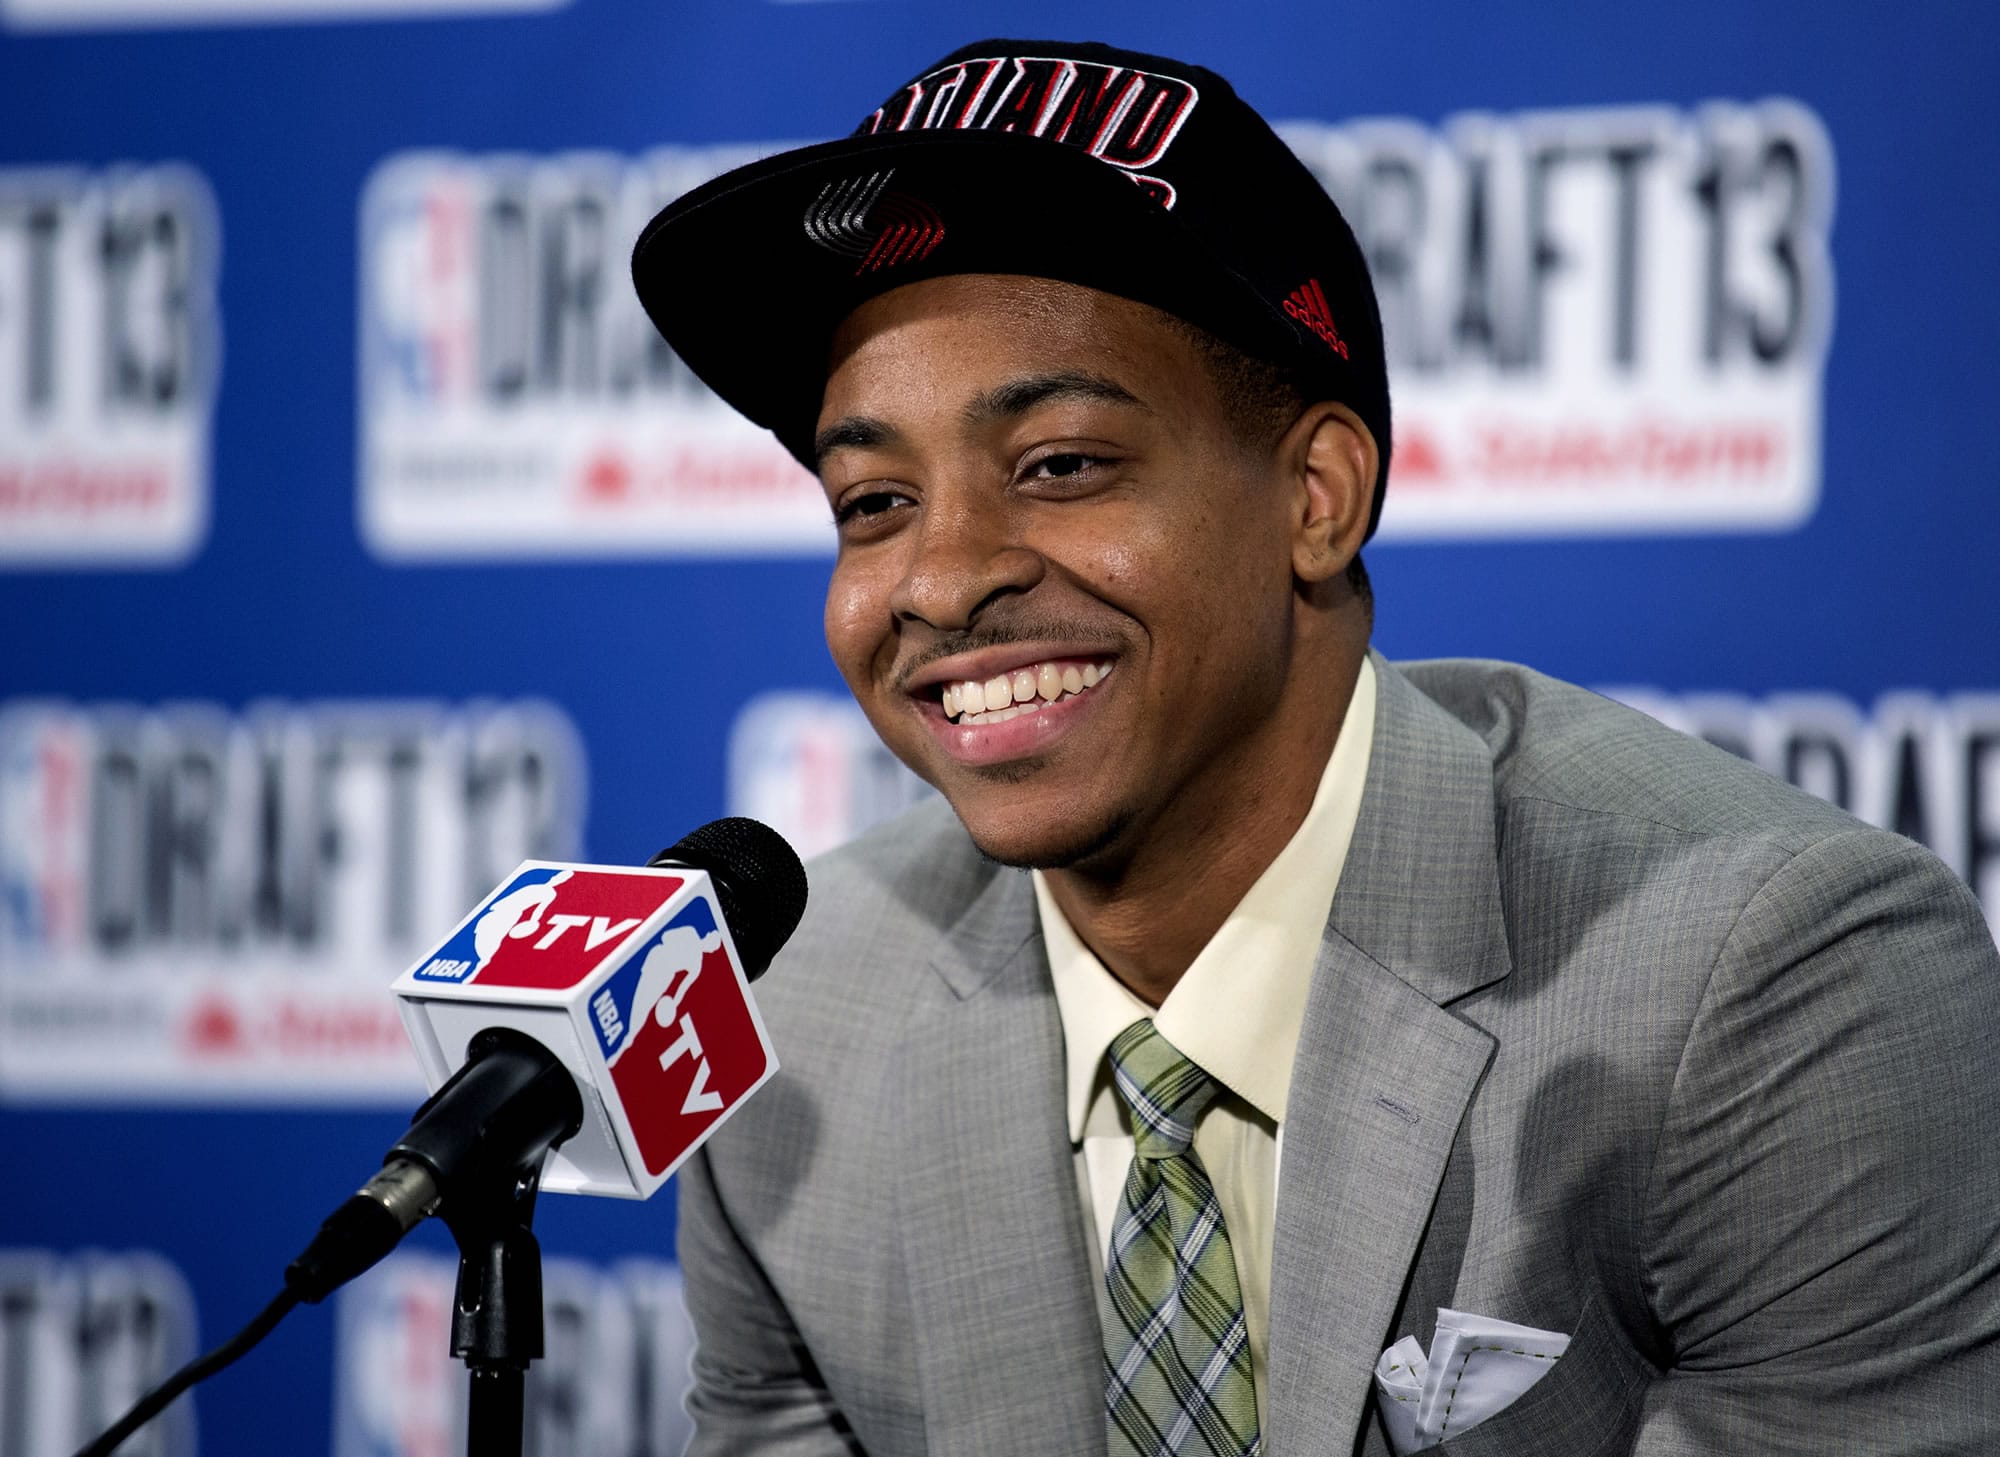 C.J. McCollum, picked by the Portland Trail Blazers in the first round of the NBA basketball draft, smiles during a news conference Thursday, June 27, 2013, in New York.